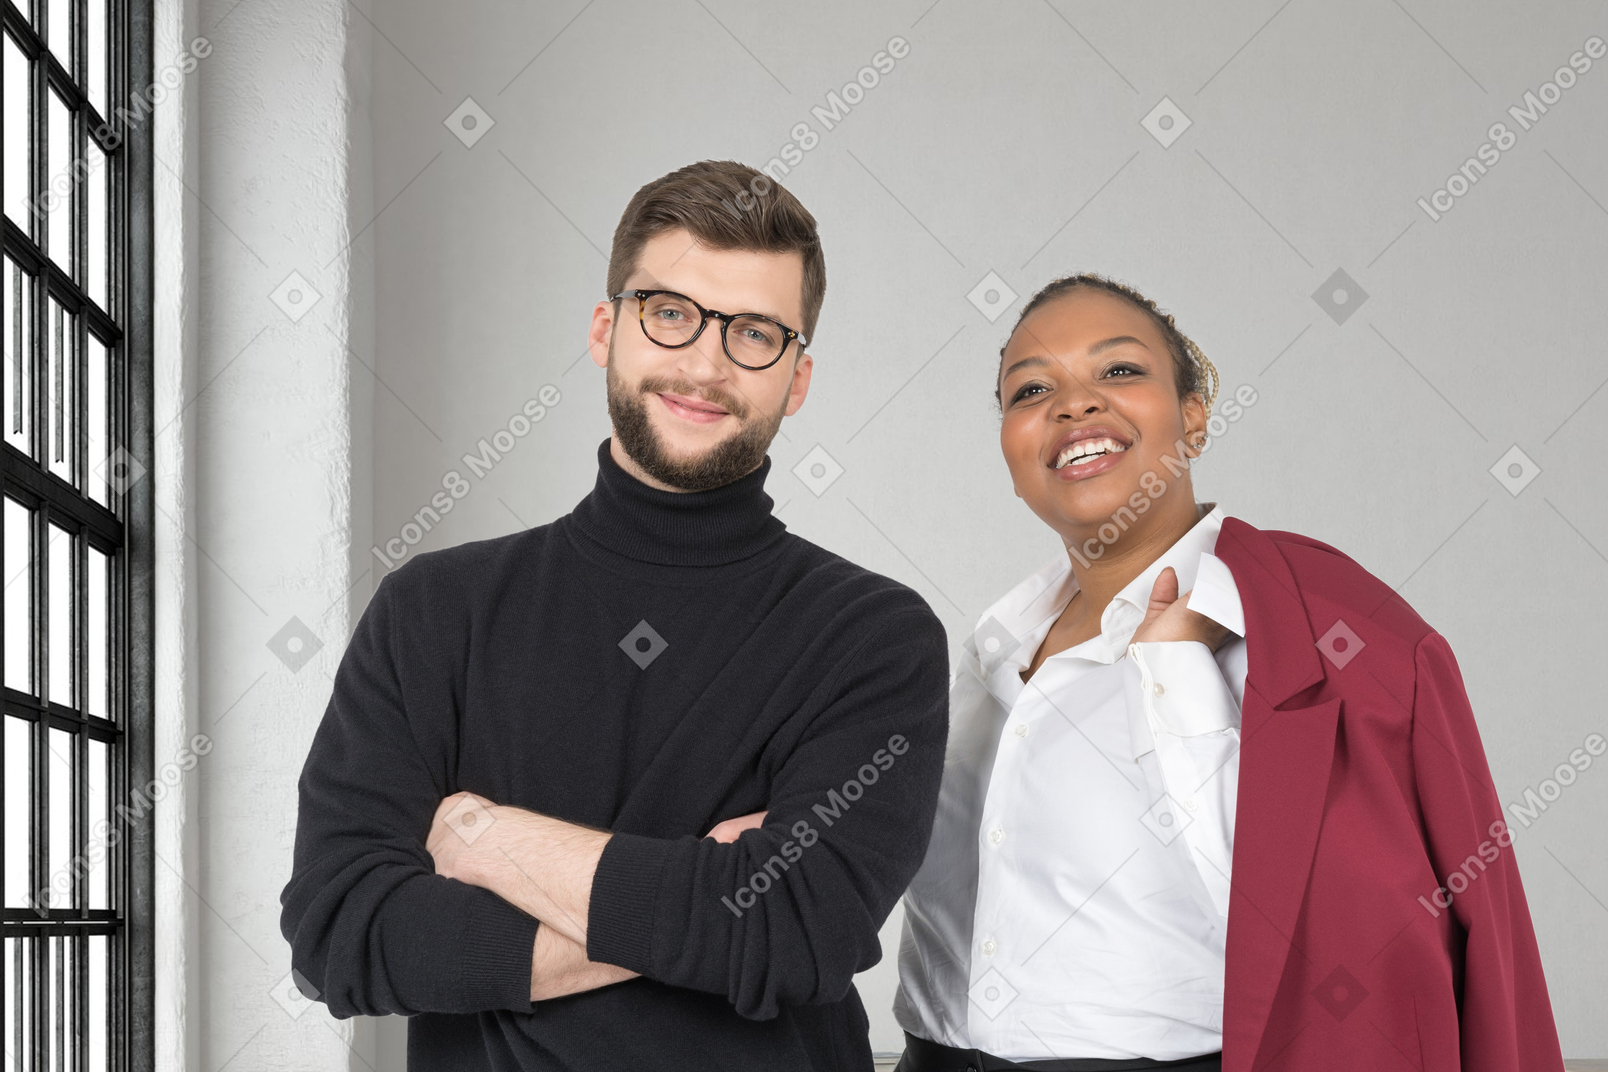 A man and a woman standing next to each other